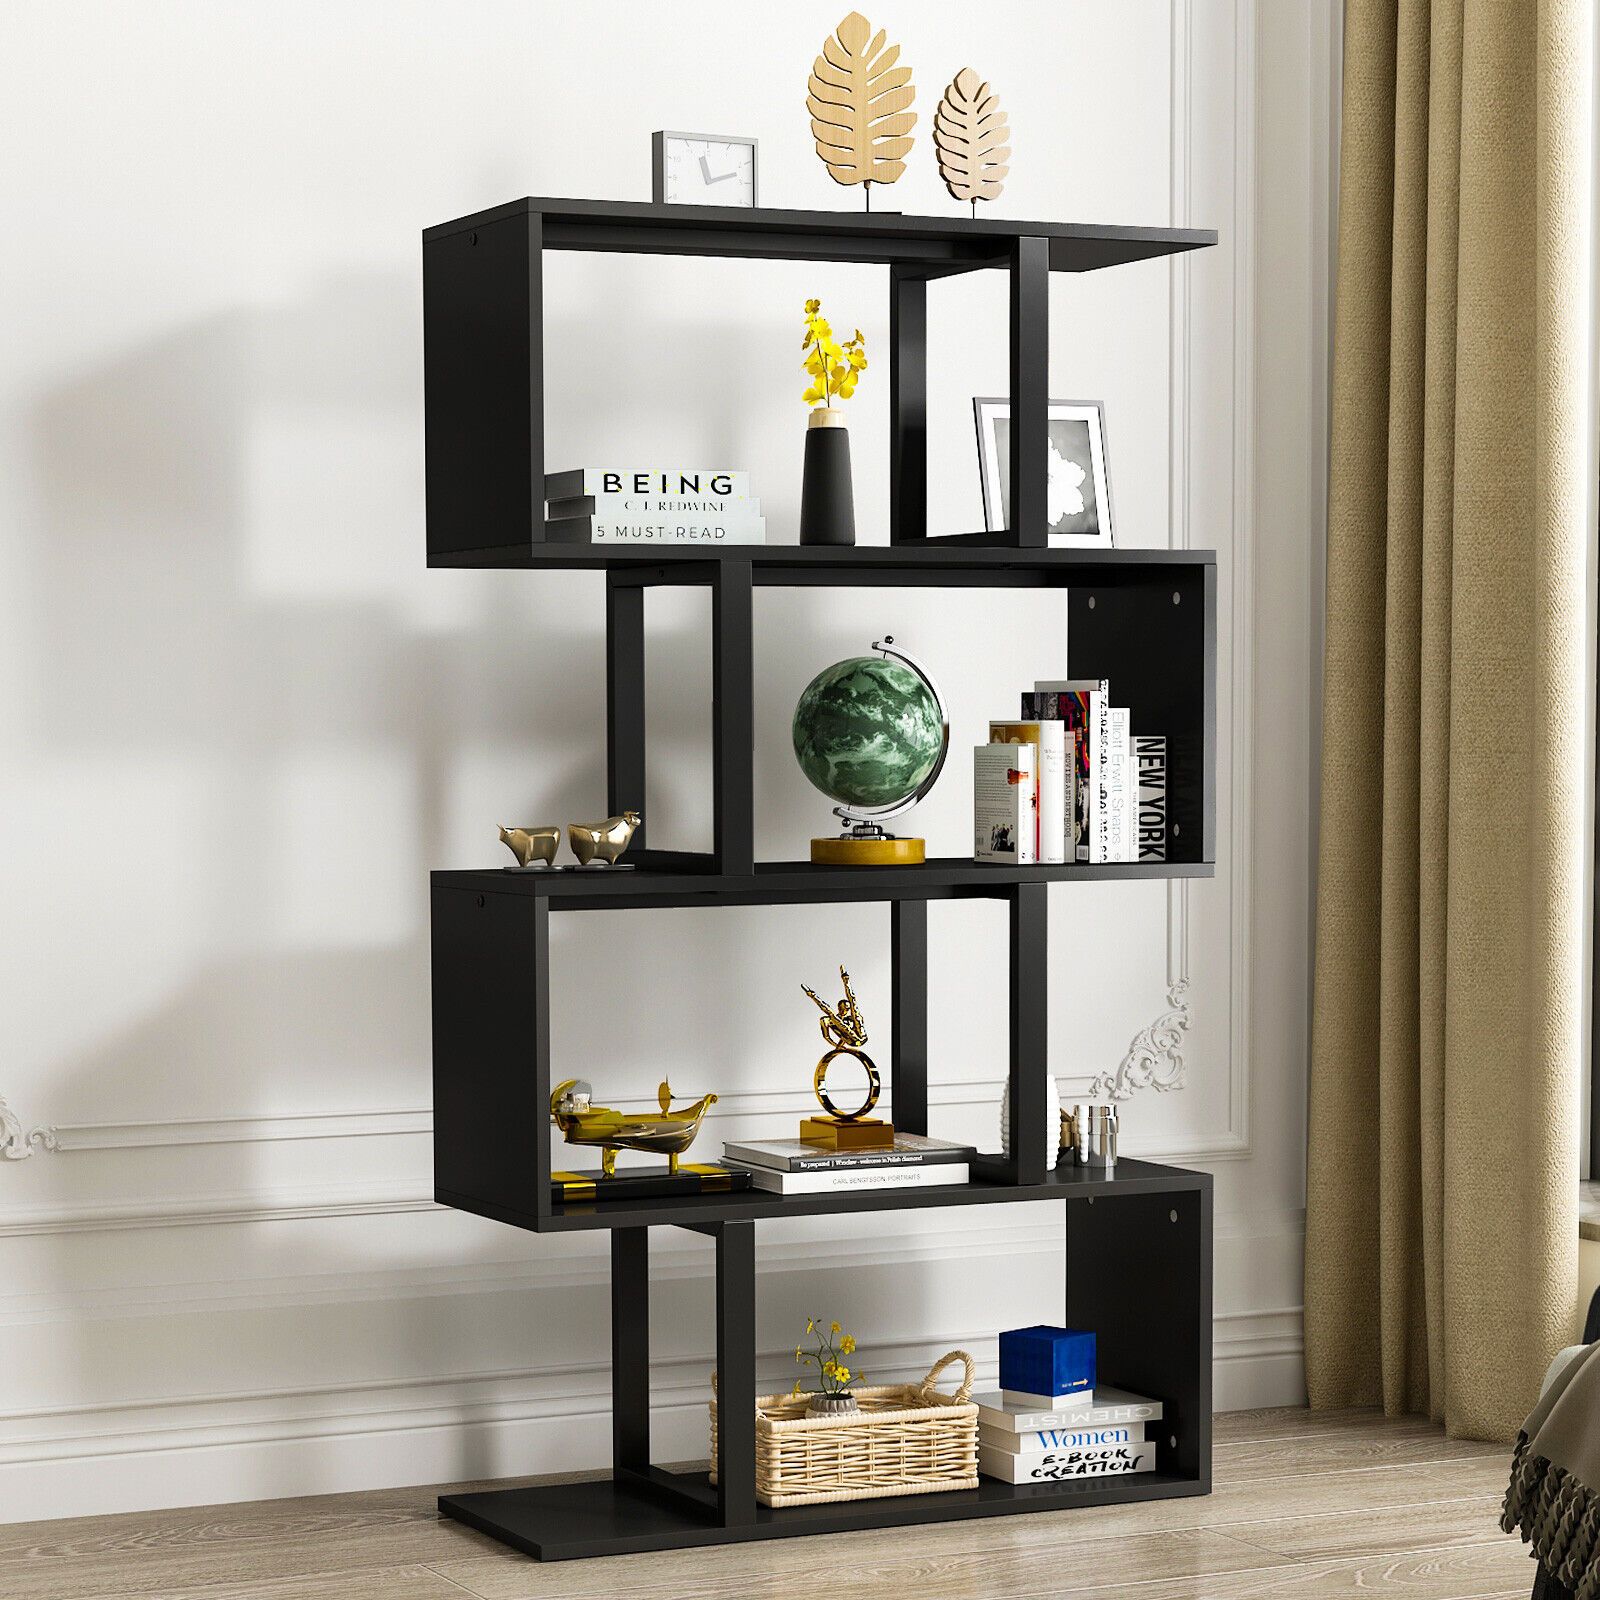 Yitahome 5 Tier Bookshelf S Shaped Z Shelf Bookshelves Bookcase Storage  Shelving | Ebay With Regard To Five Tier Bookcases (View 10 of 15)